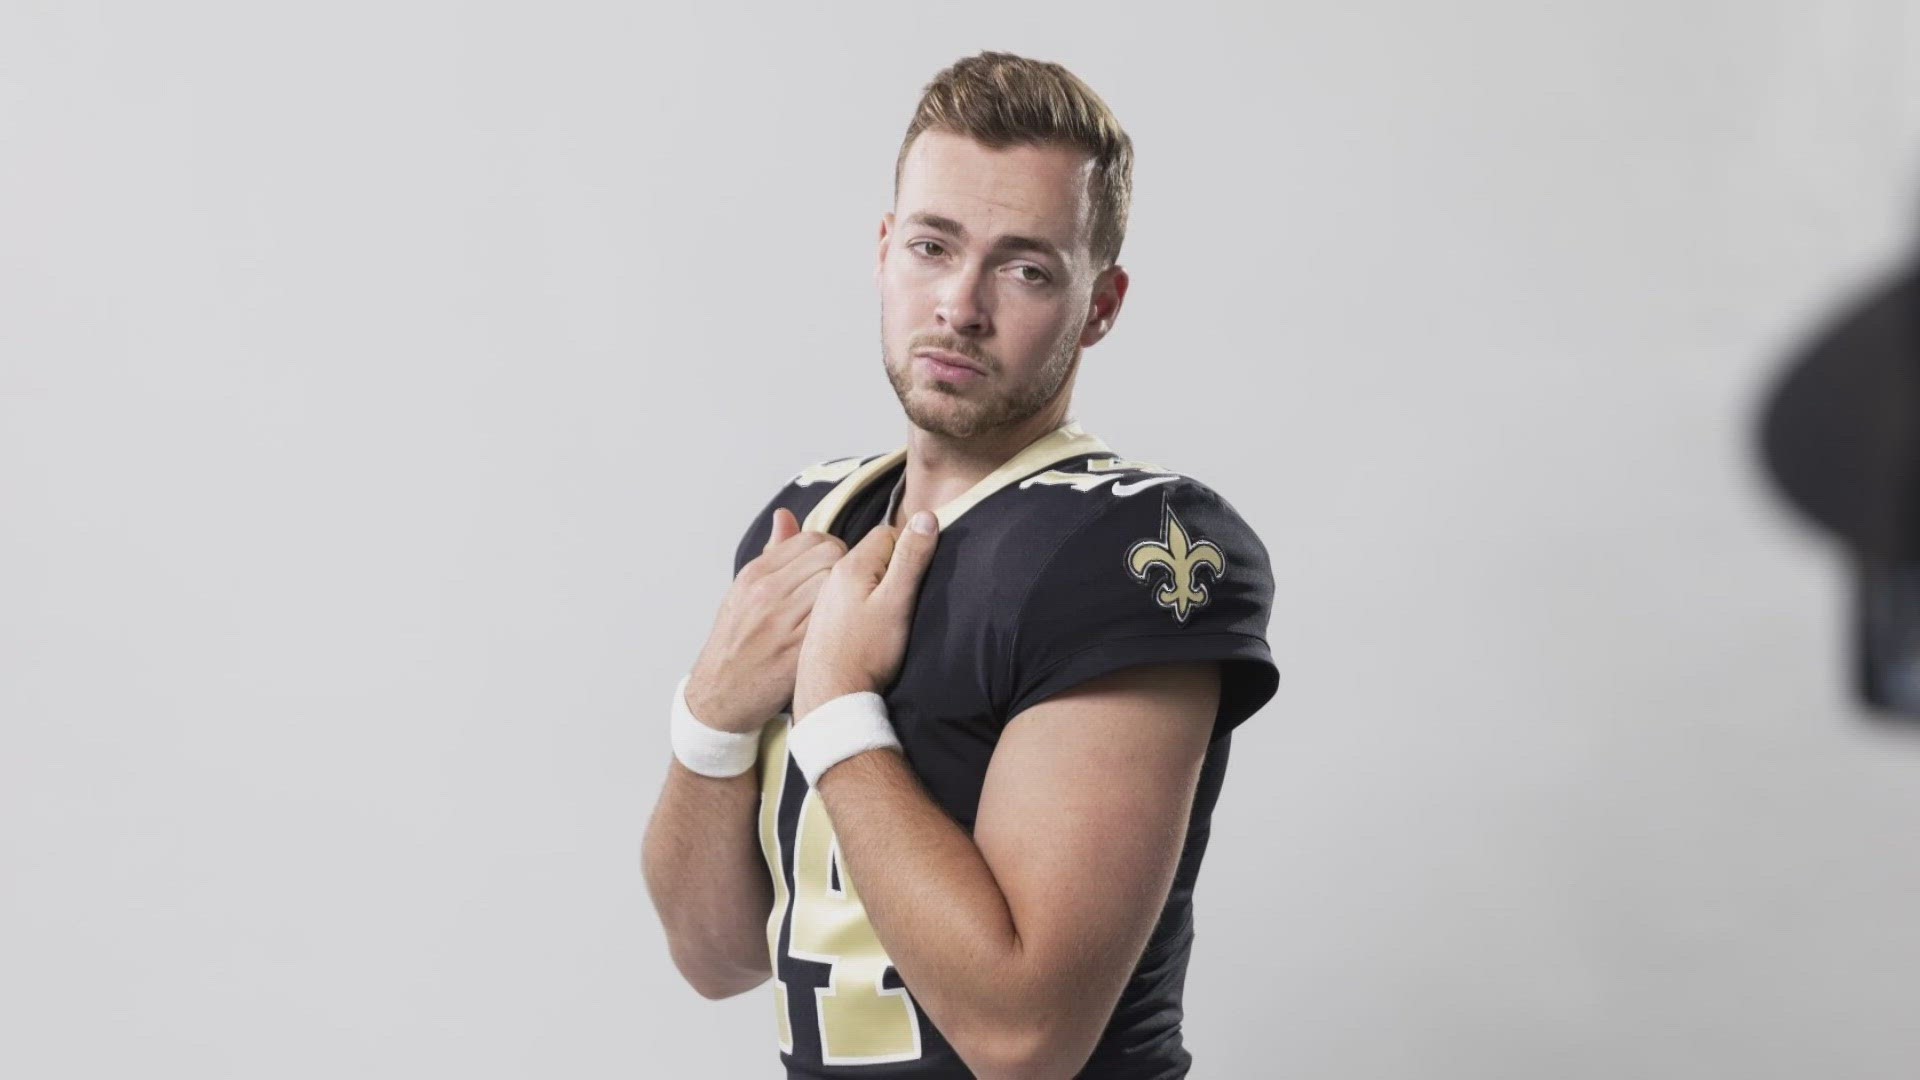 Haener may have already endeared himself to Saints fans after a recent photoshoot of the rookie quarterback went viral.